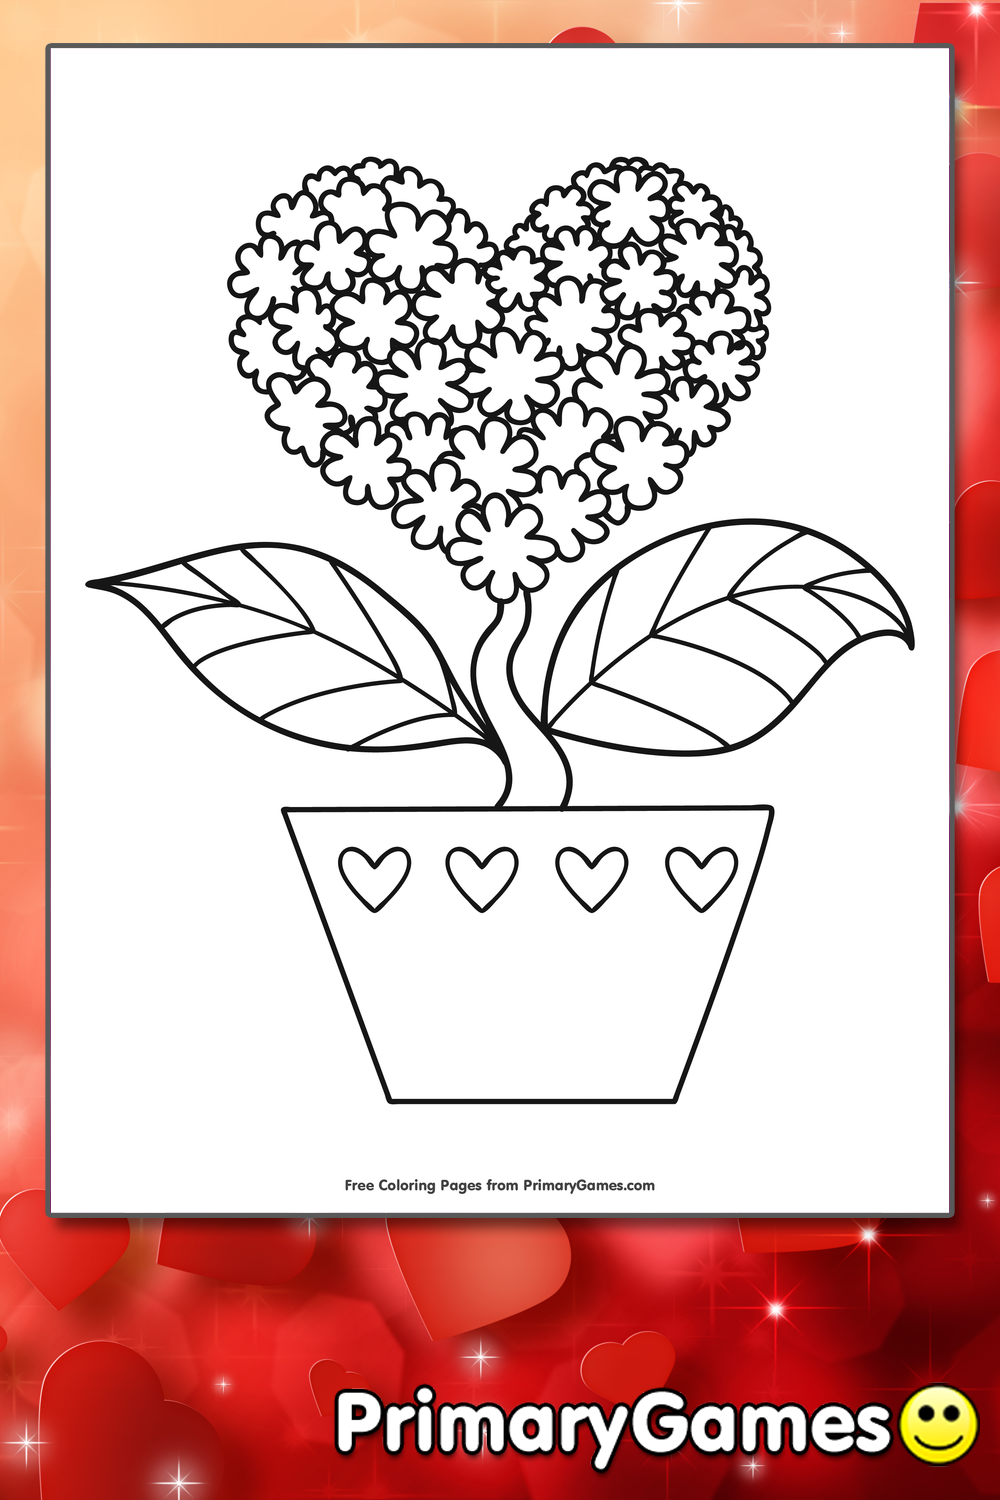 Heart shaped flower coloring page â free printable pdf from